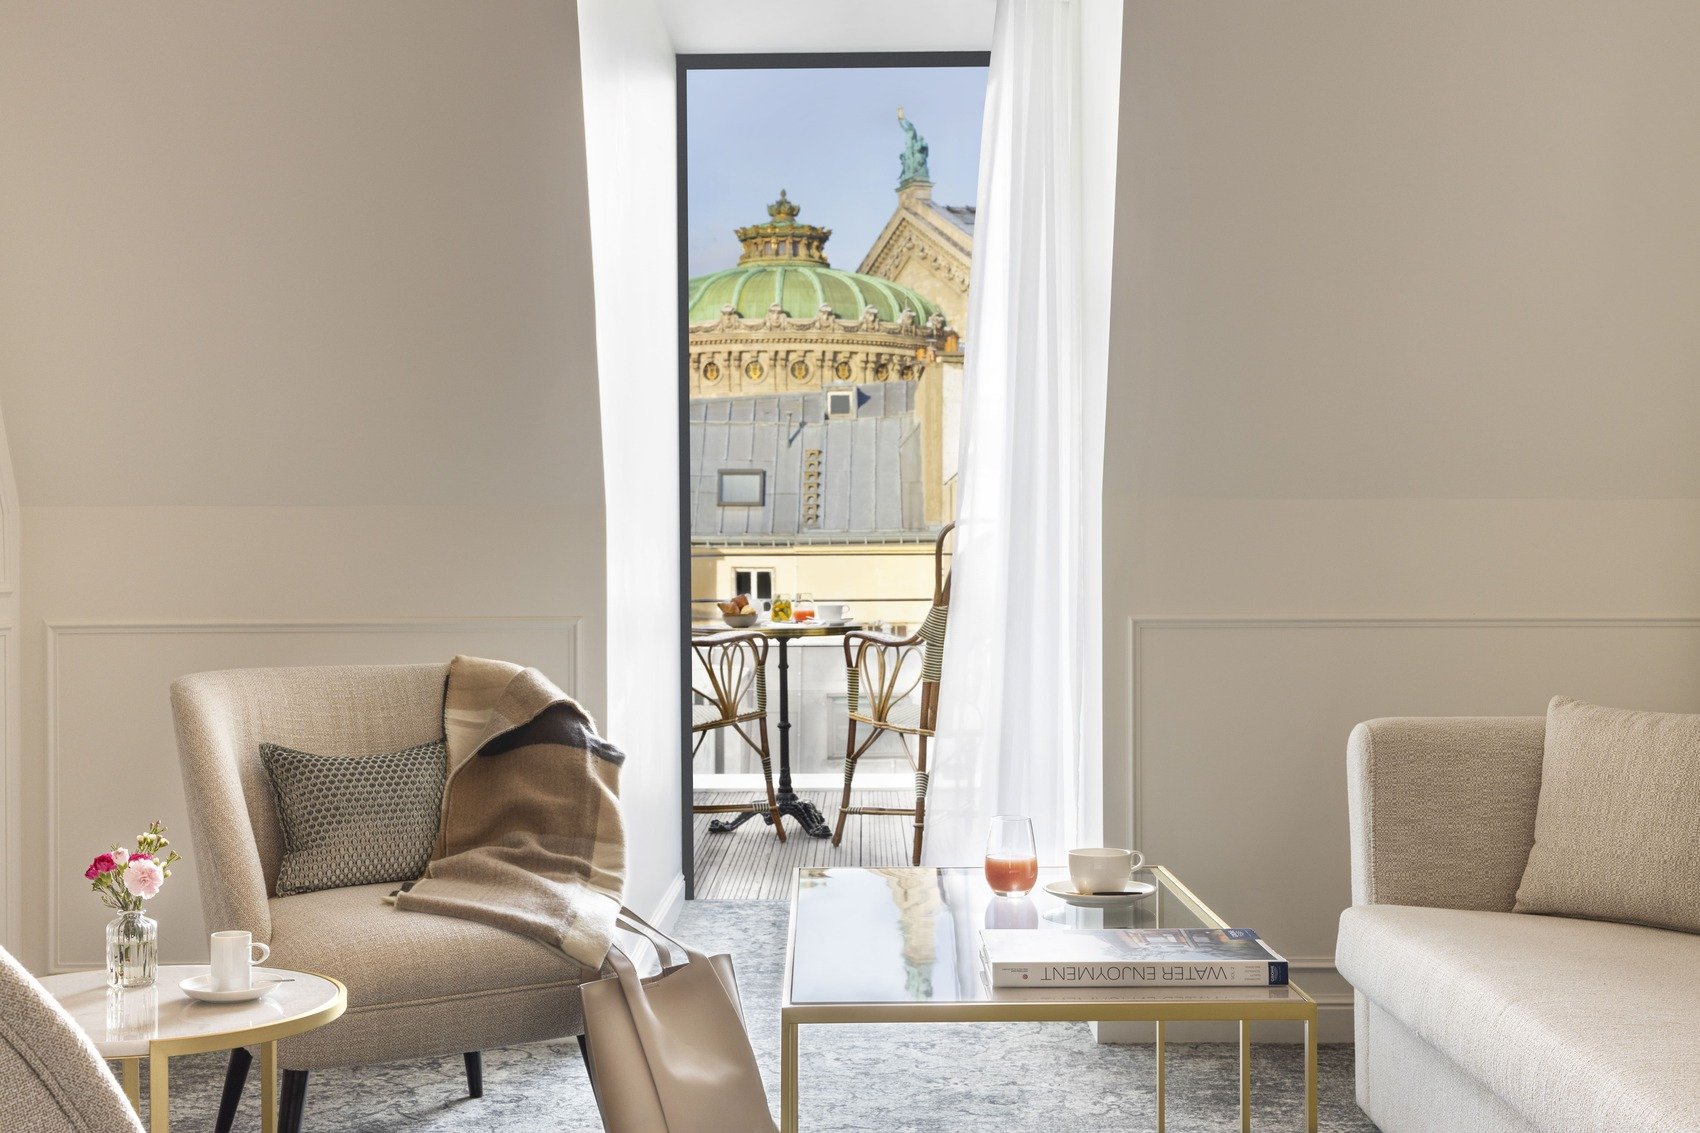 Luxury boutique hotel - Maison Albar Hotels Le Vendome 5 stars - hotel with view on Paris roofs